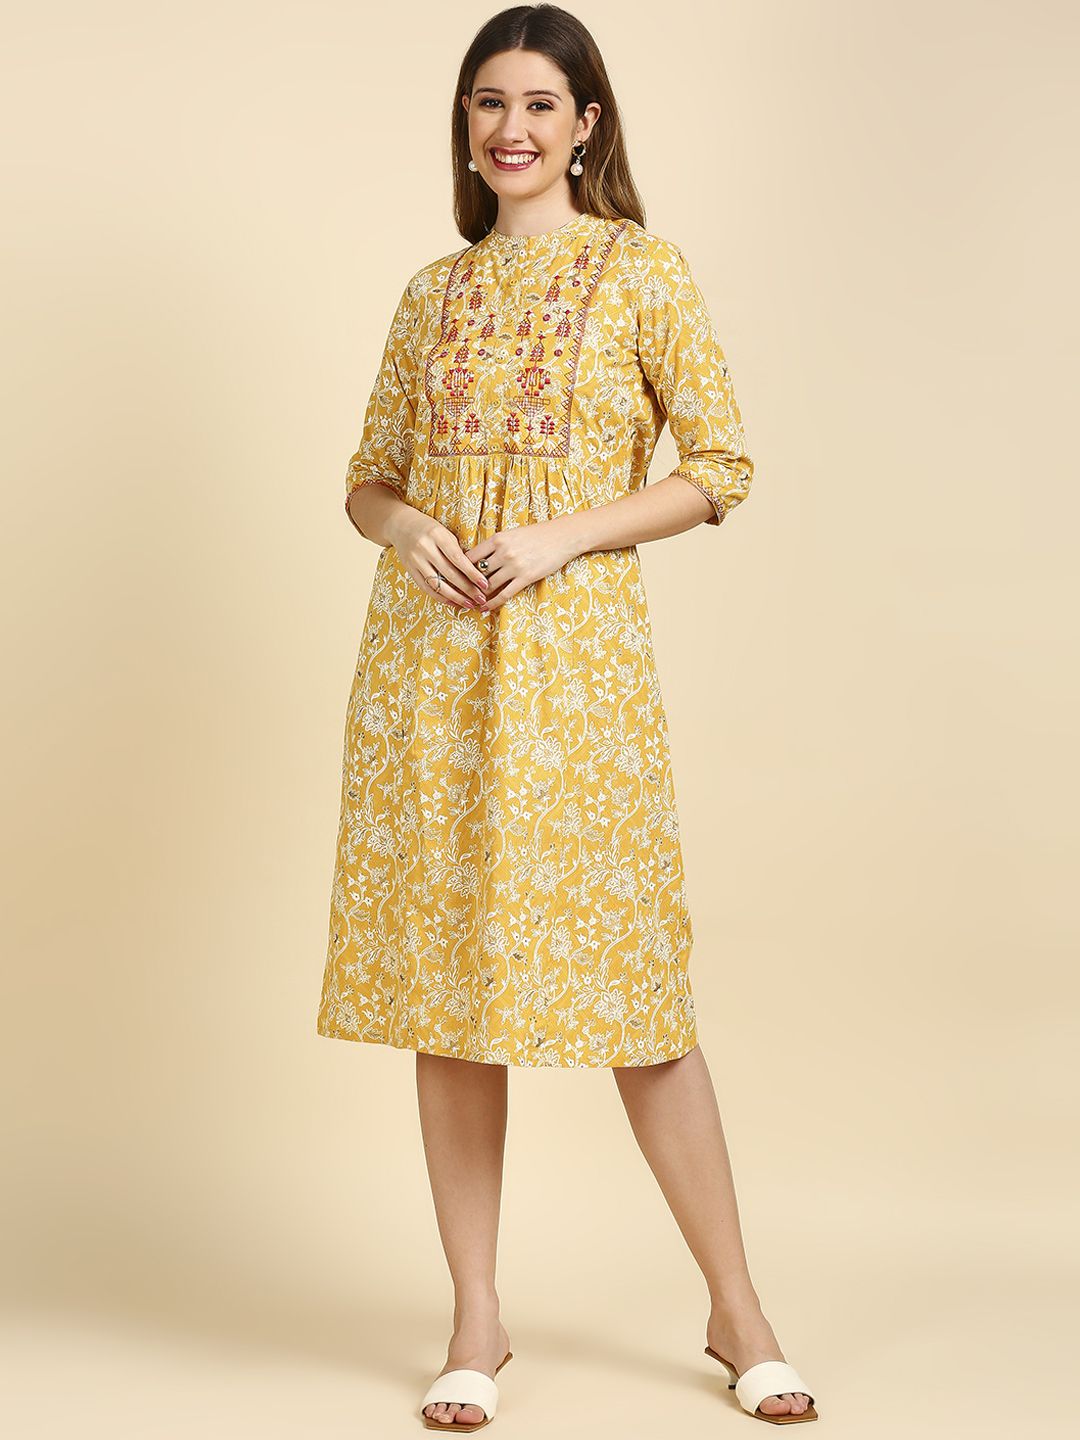 Anubhutee Yellow Cotton Floral Ethnic A-Line Midi Dress Price in India